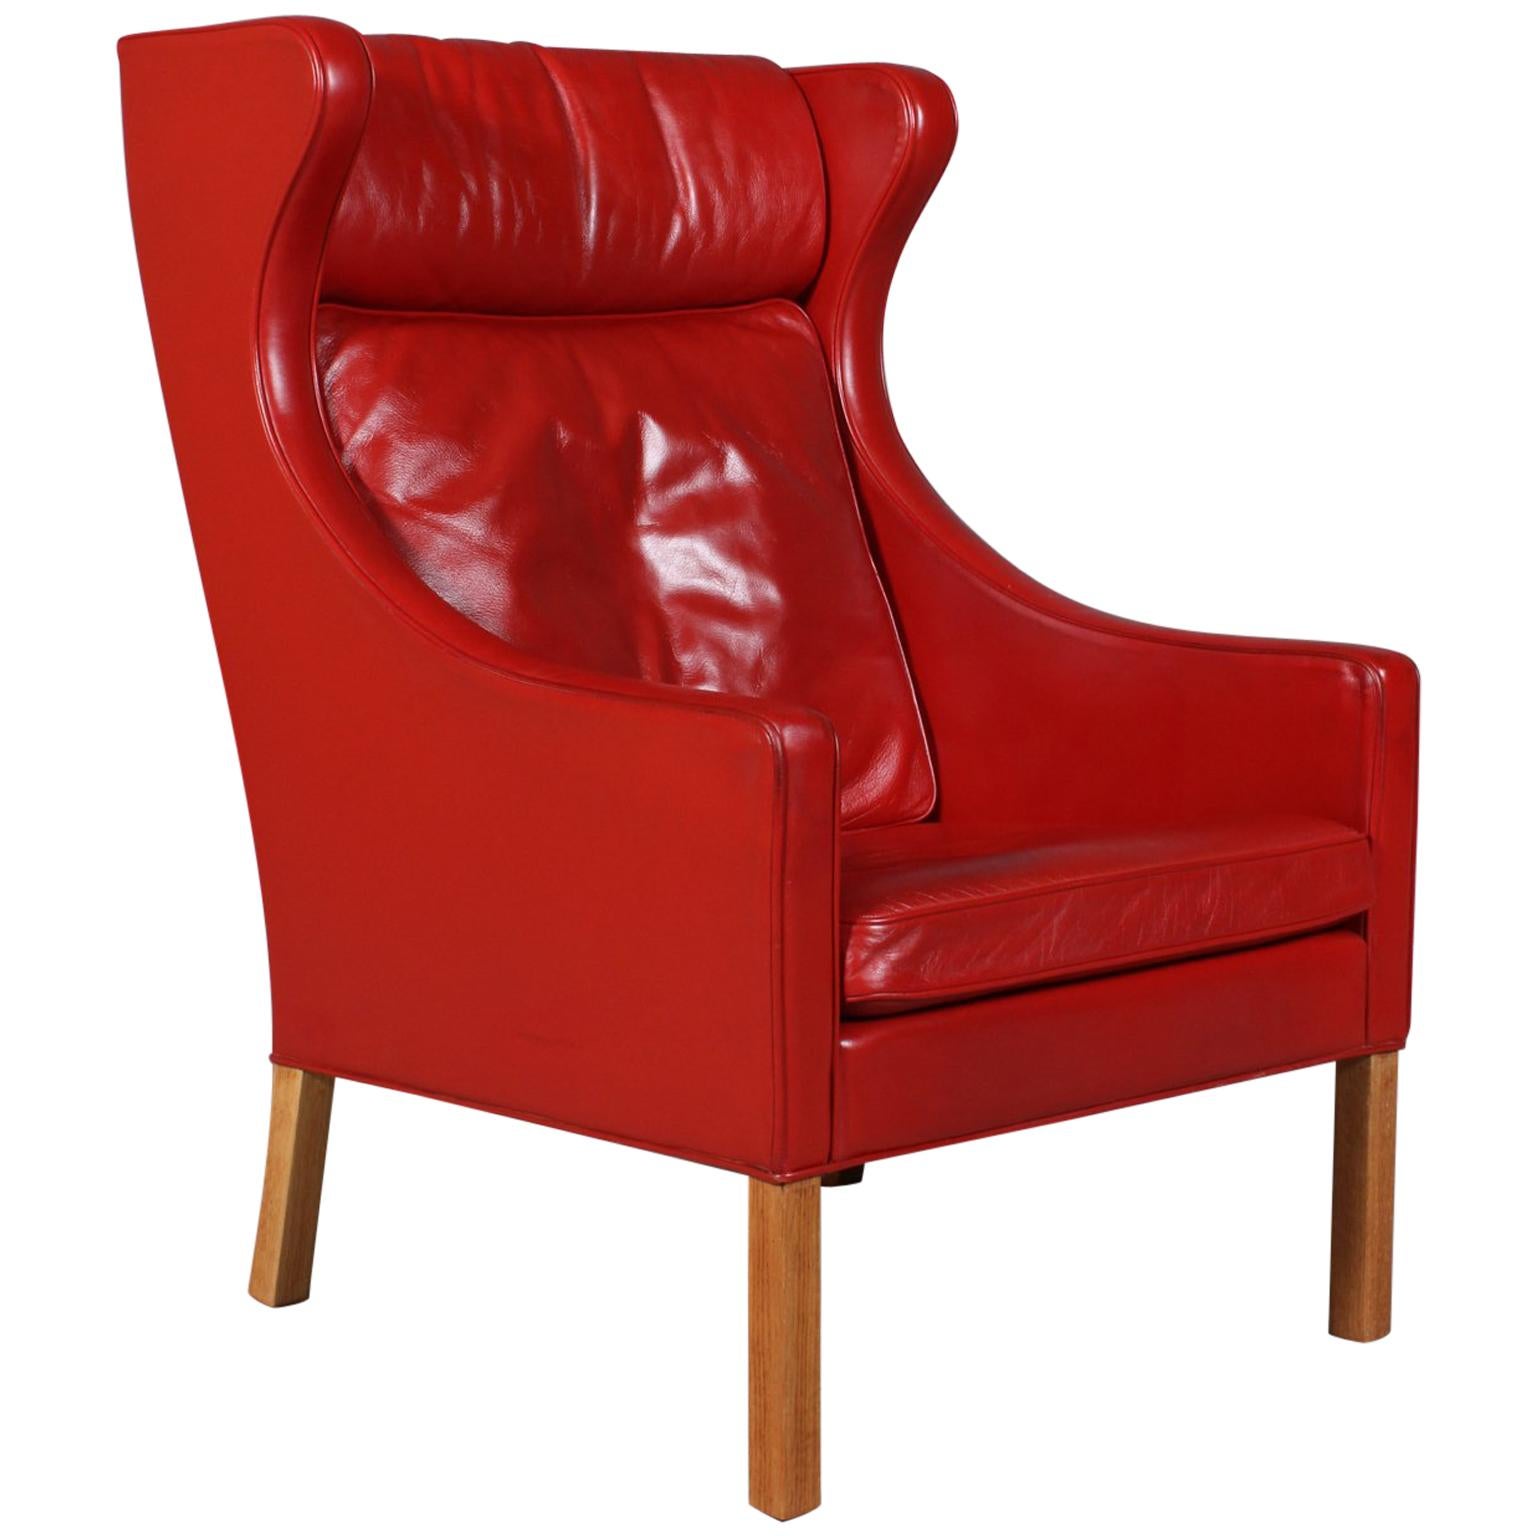 Børge Mogensen Wingback Chair in Original Red Leather, Model 2204